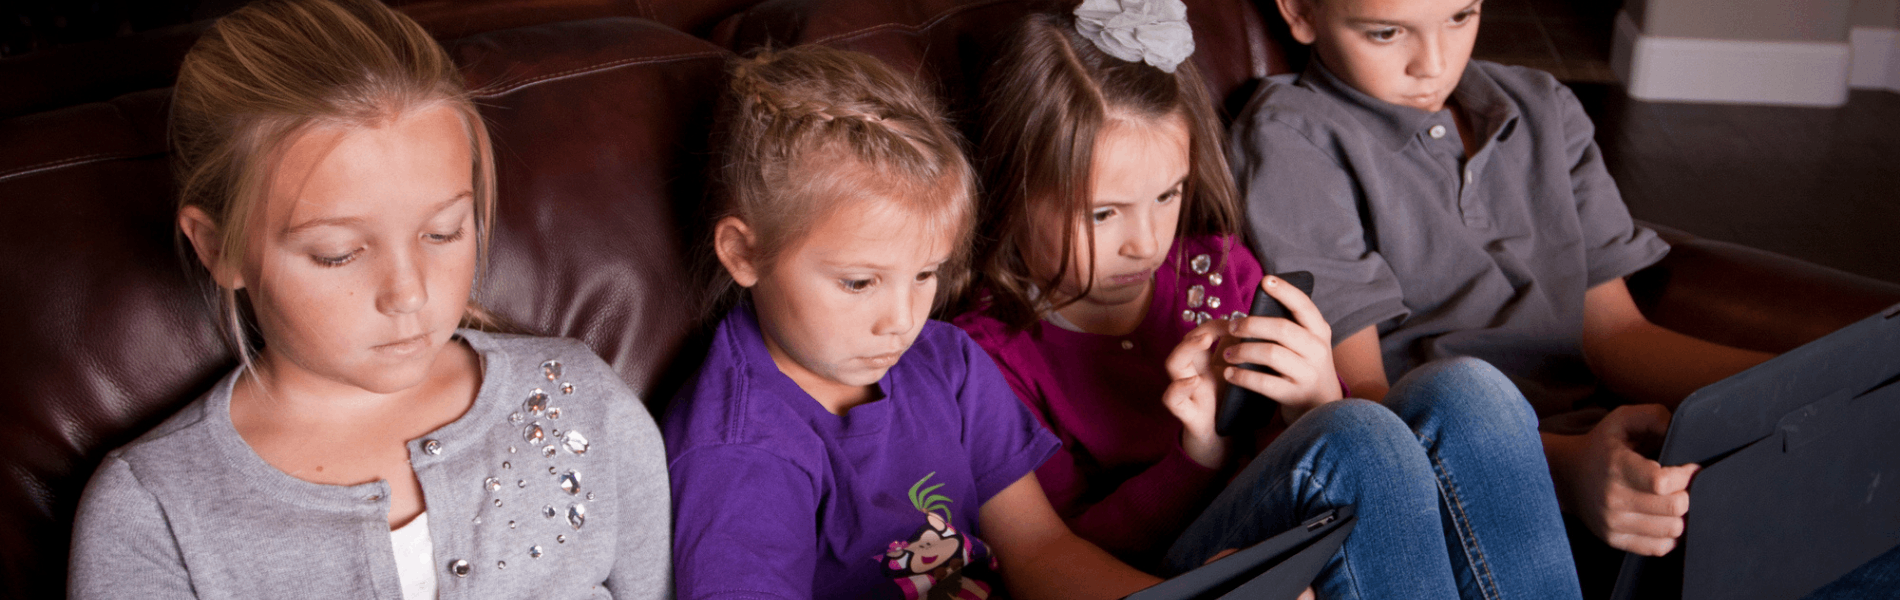 A row of four young children sitting on a leather couch, fixated on the mobile devices they are each holding.